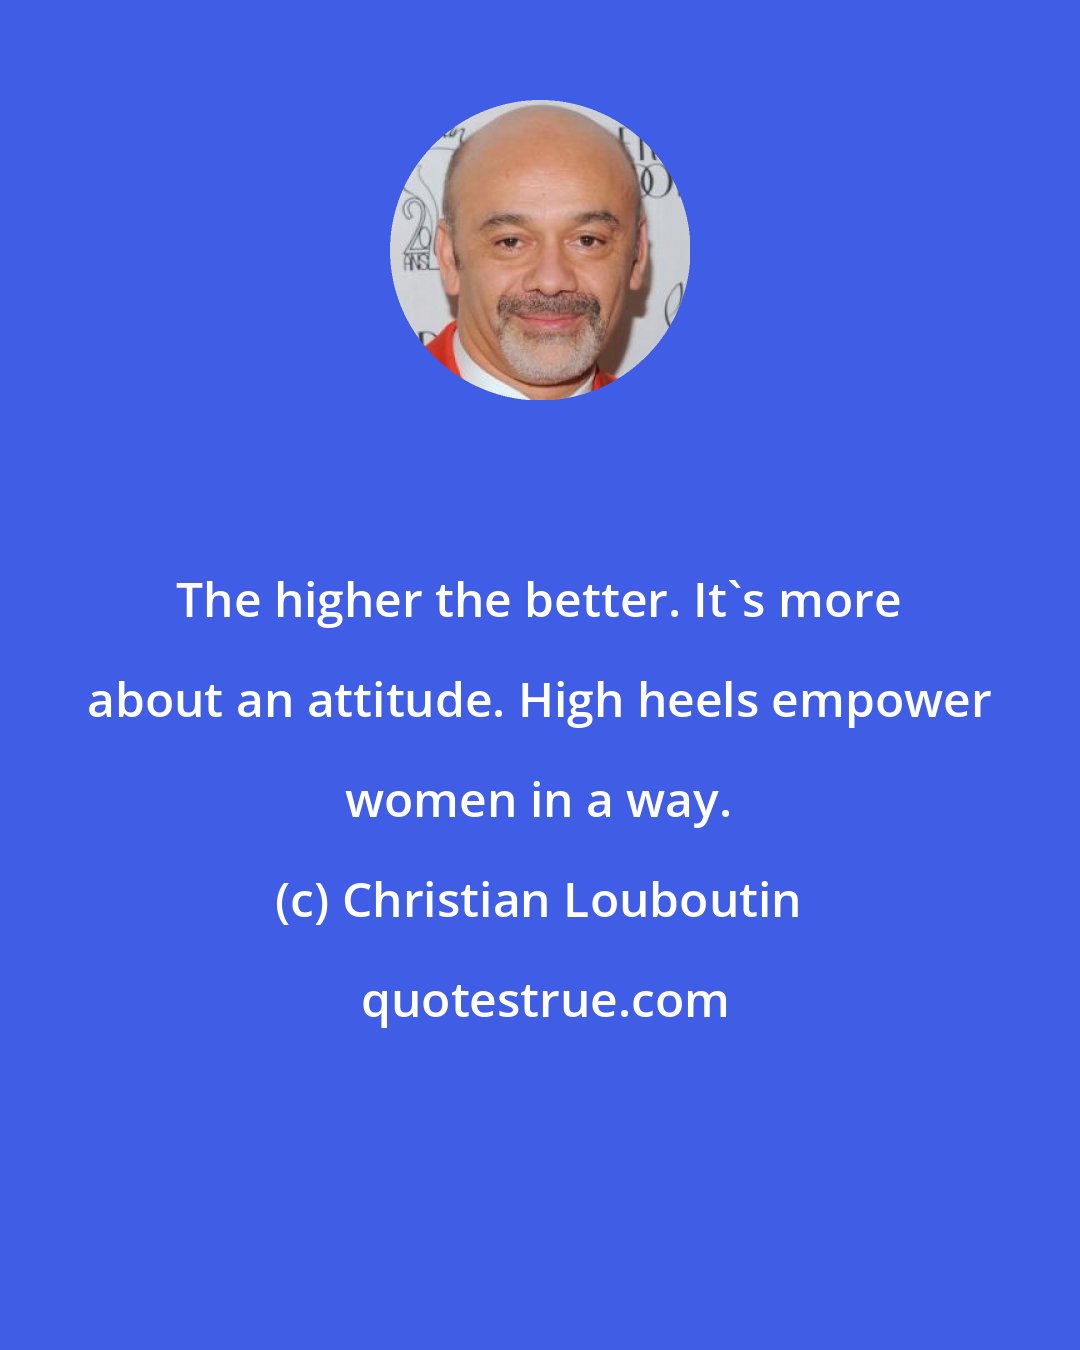 Christian Louboutin: The higher the better. It's more about an attitude. High heels empower women in a way.